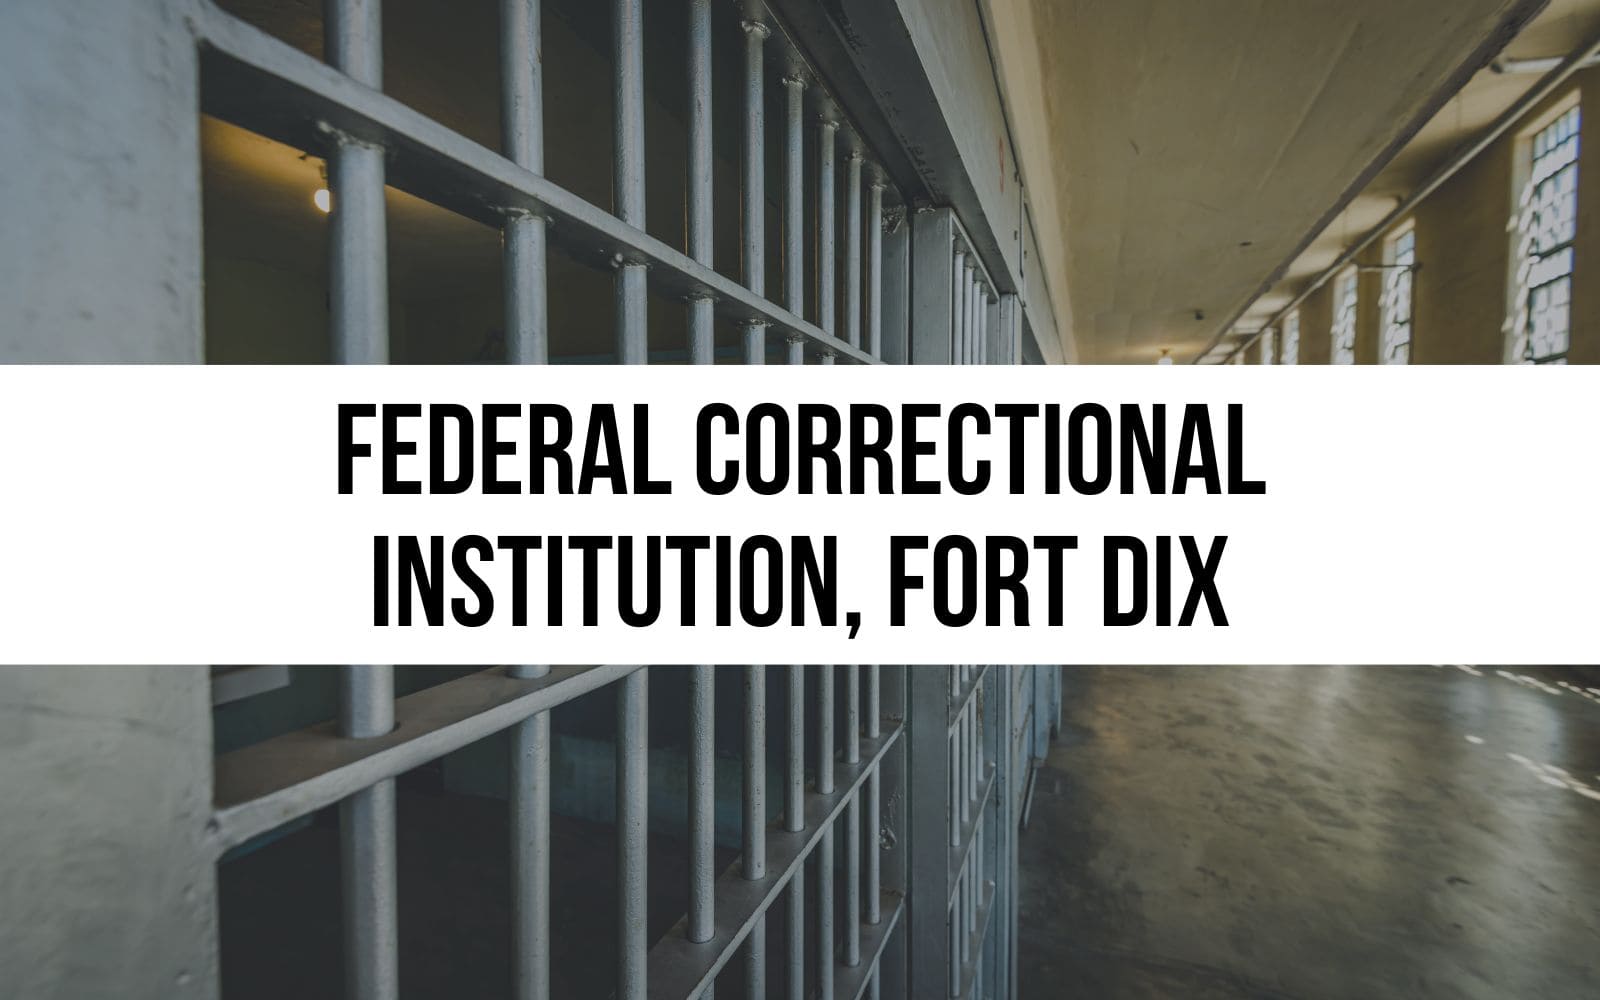 Federal Correctional Institution Fort Dix